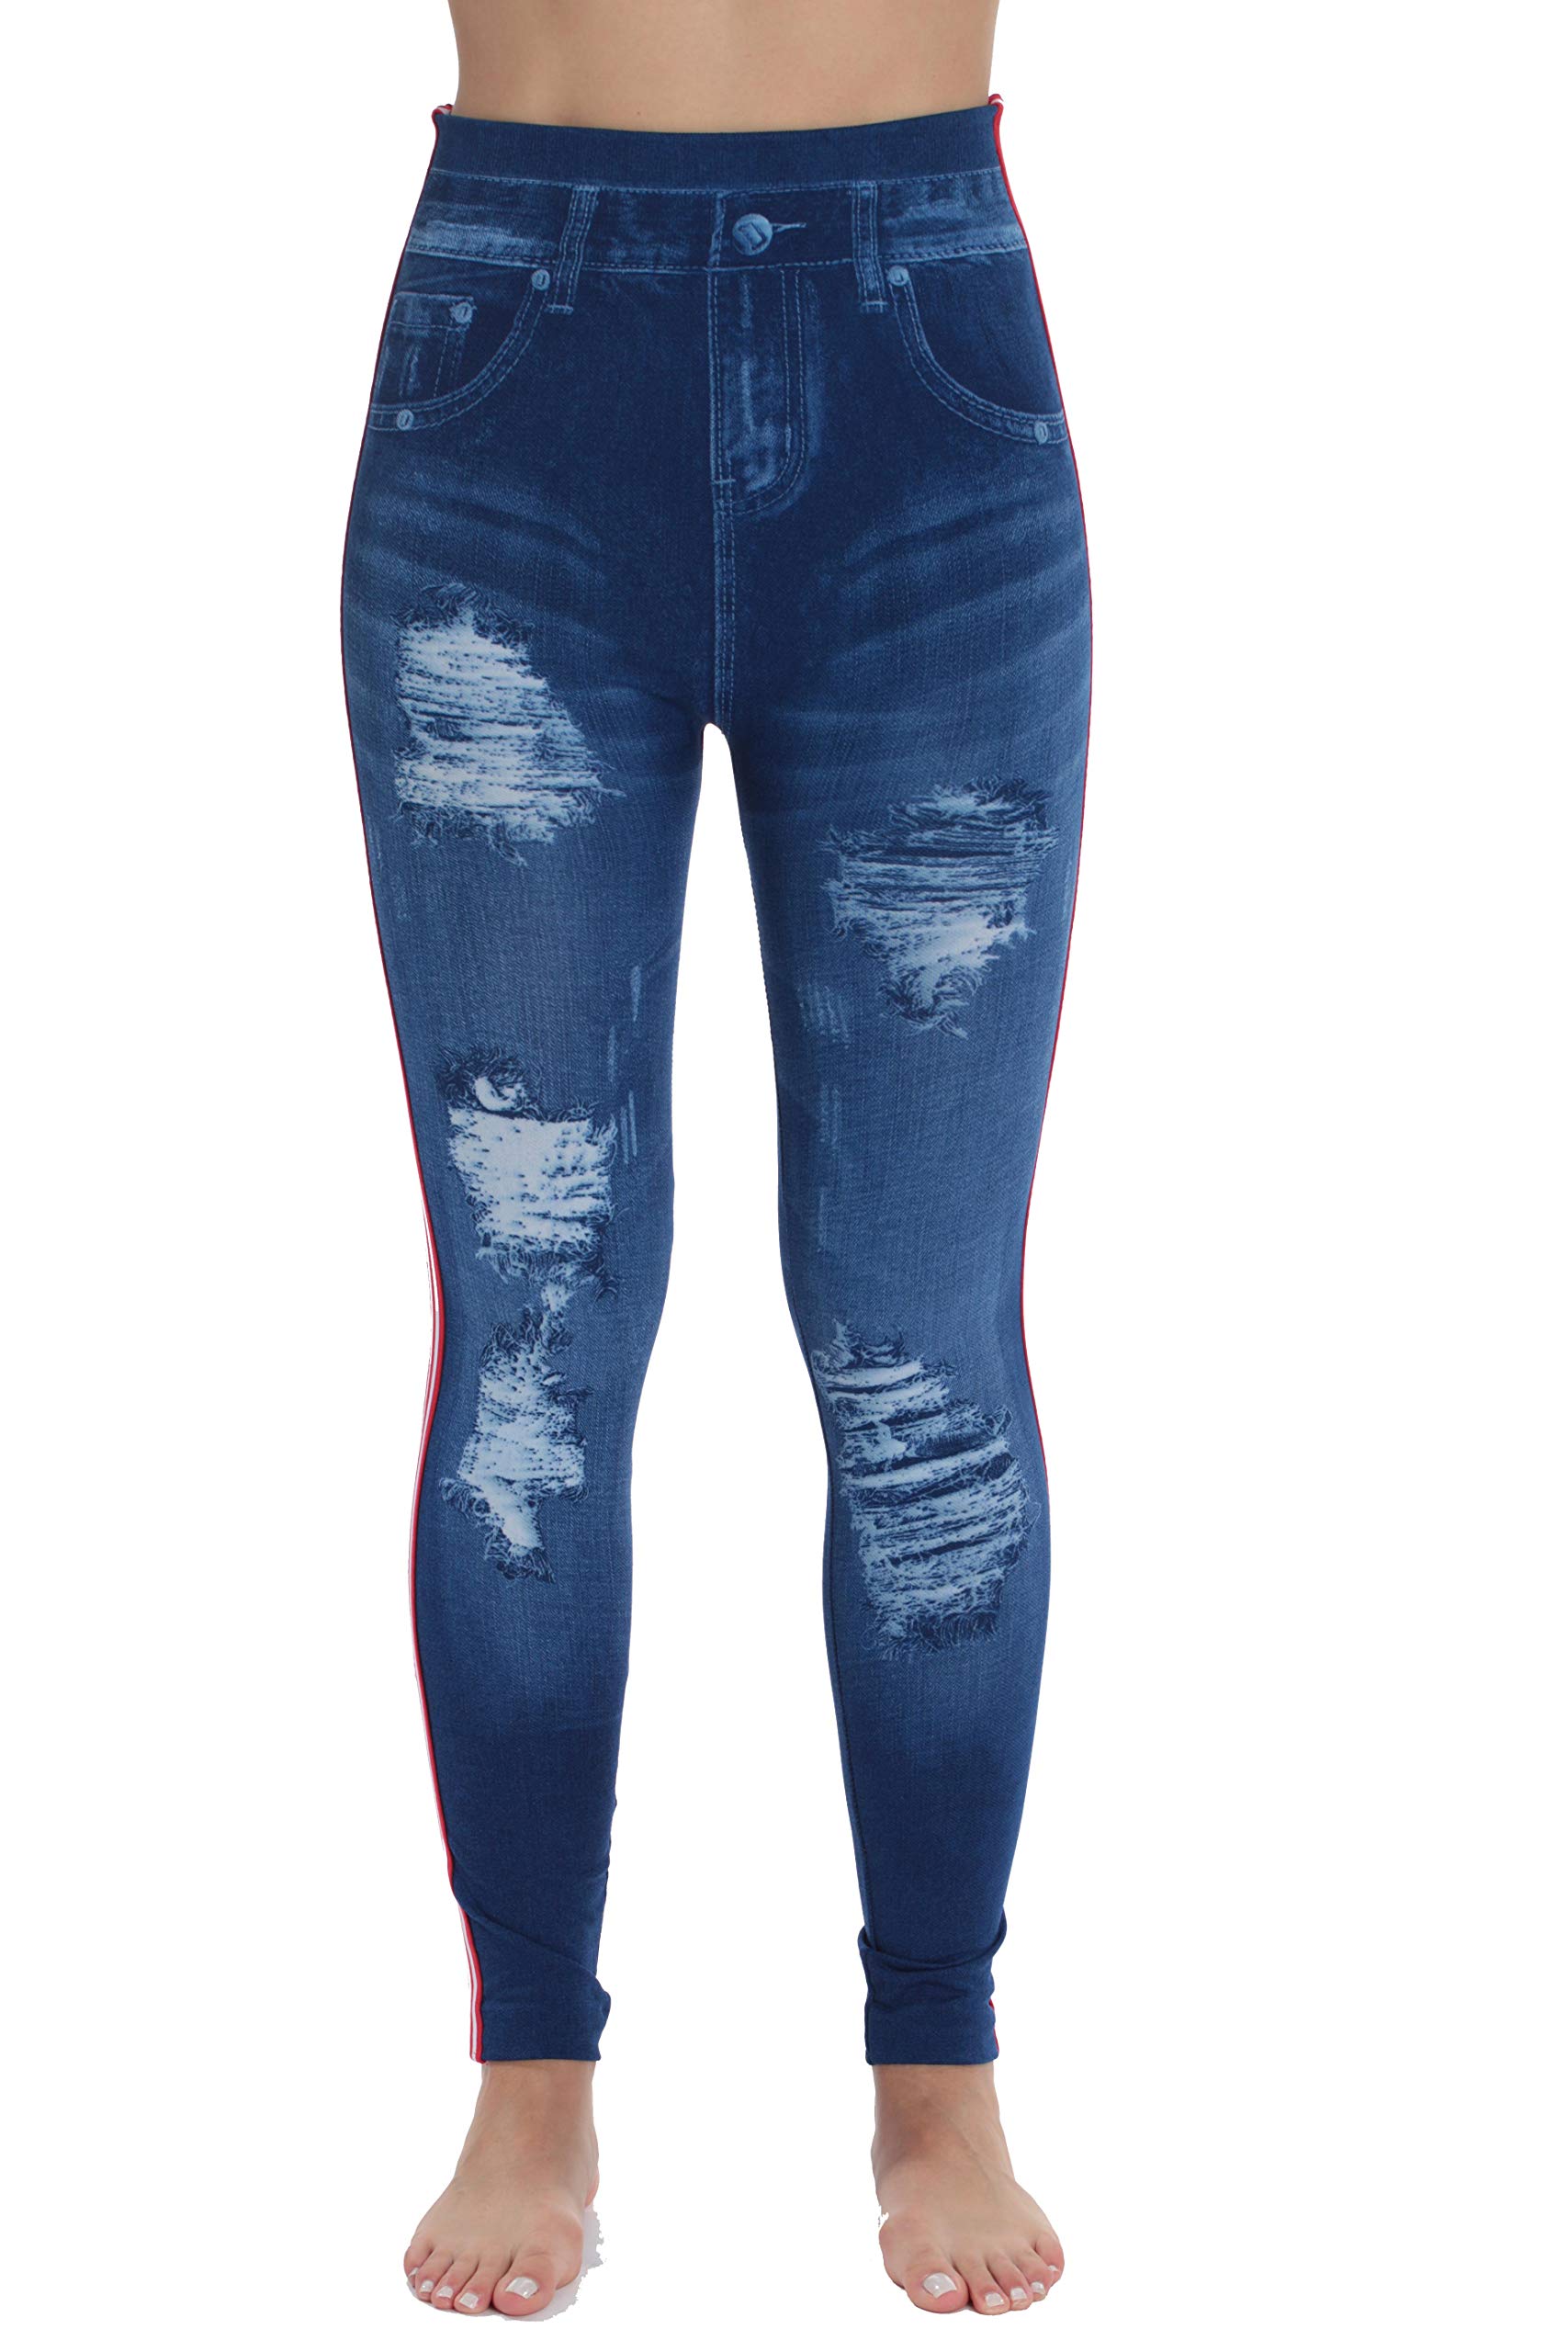 Just Love Women's Denim Wash Leggings - Stretchy and Comfortable Skinny Pants (Blue Striped, Small - Medium) - image 1 of 3